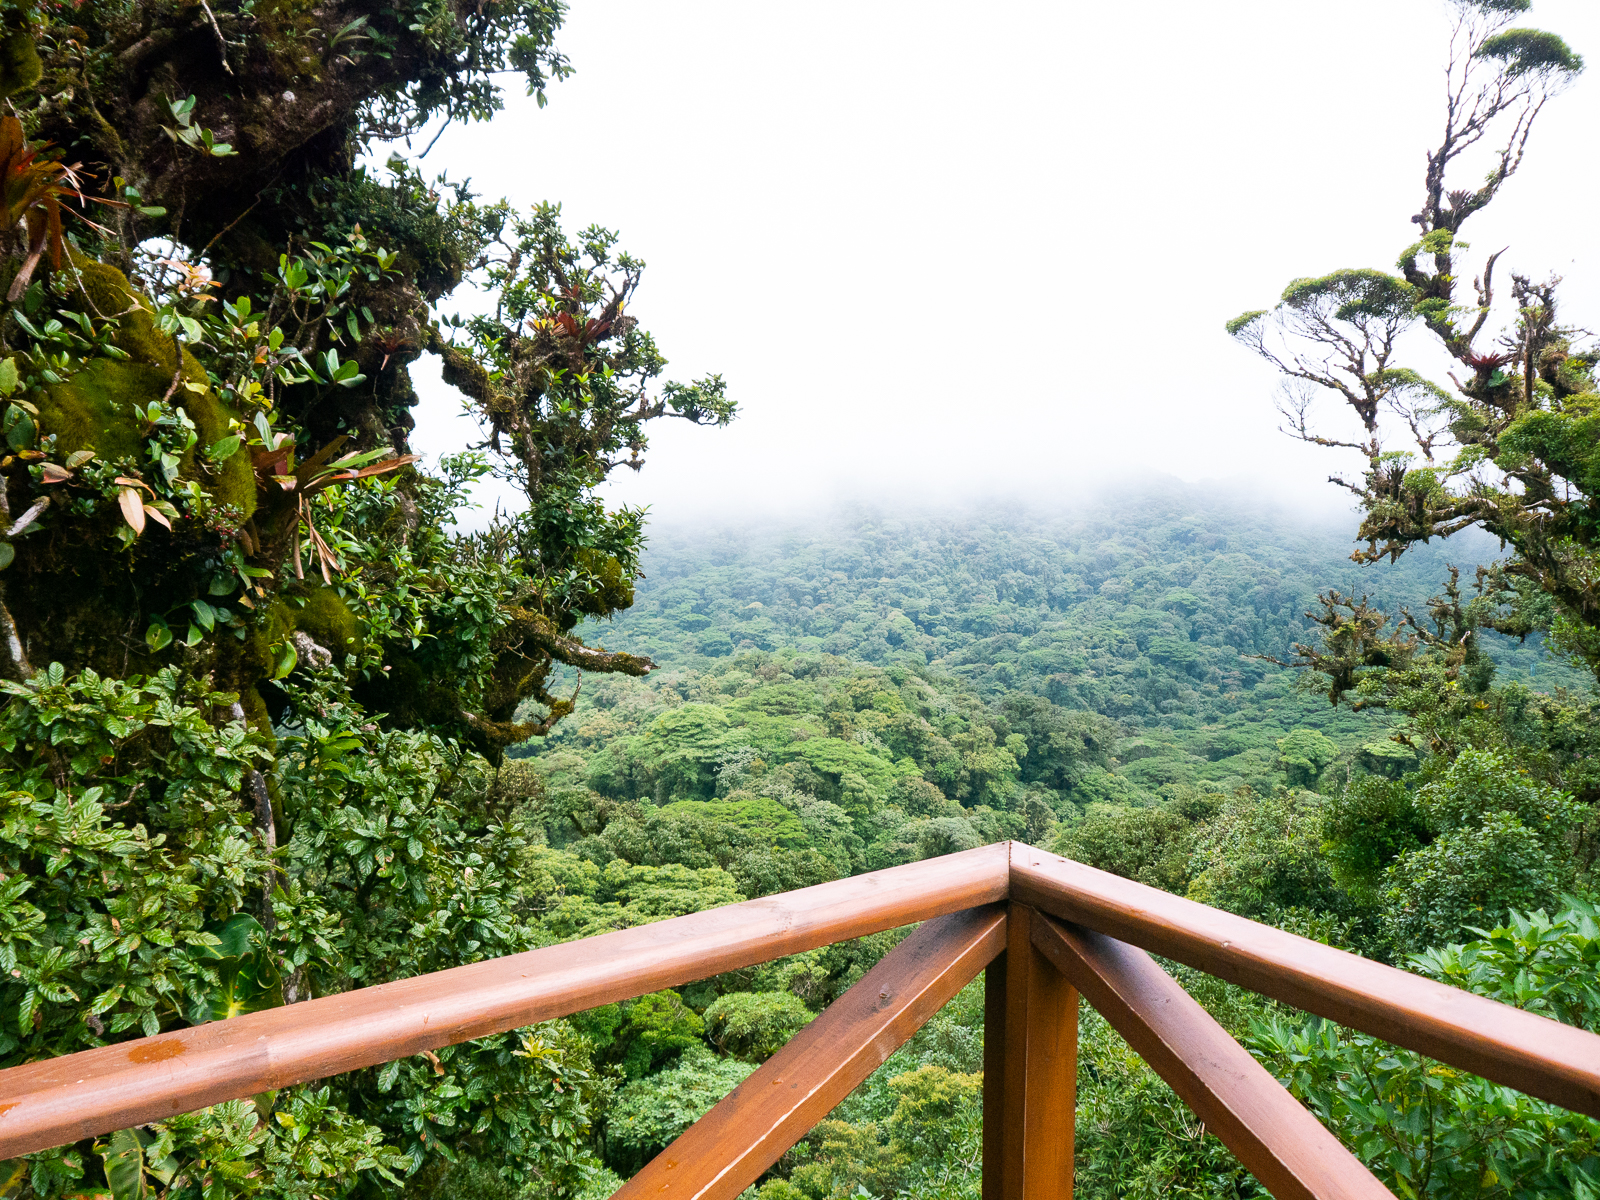 15 Best Things To Do in Costa Rica